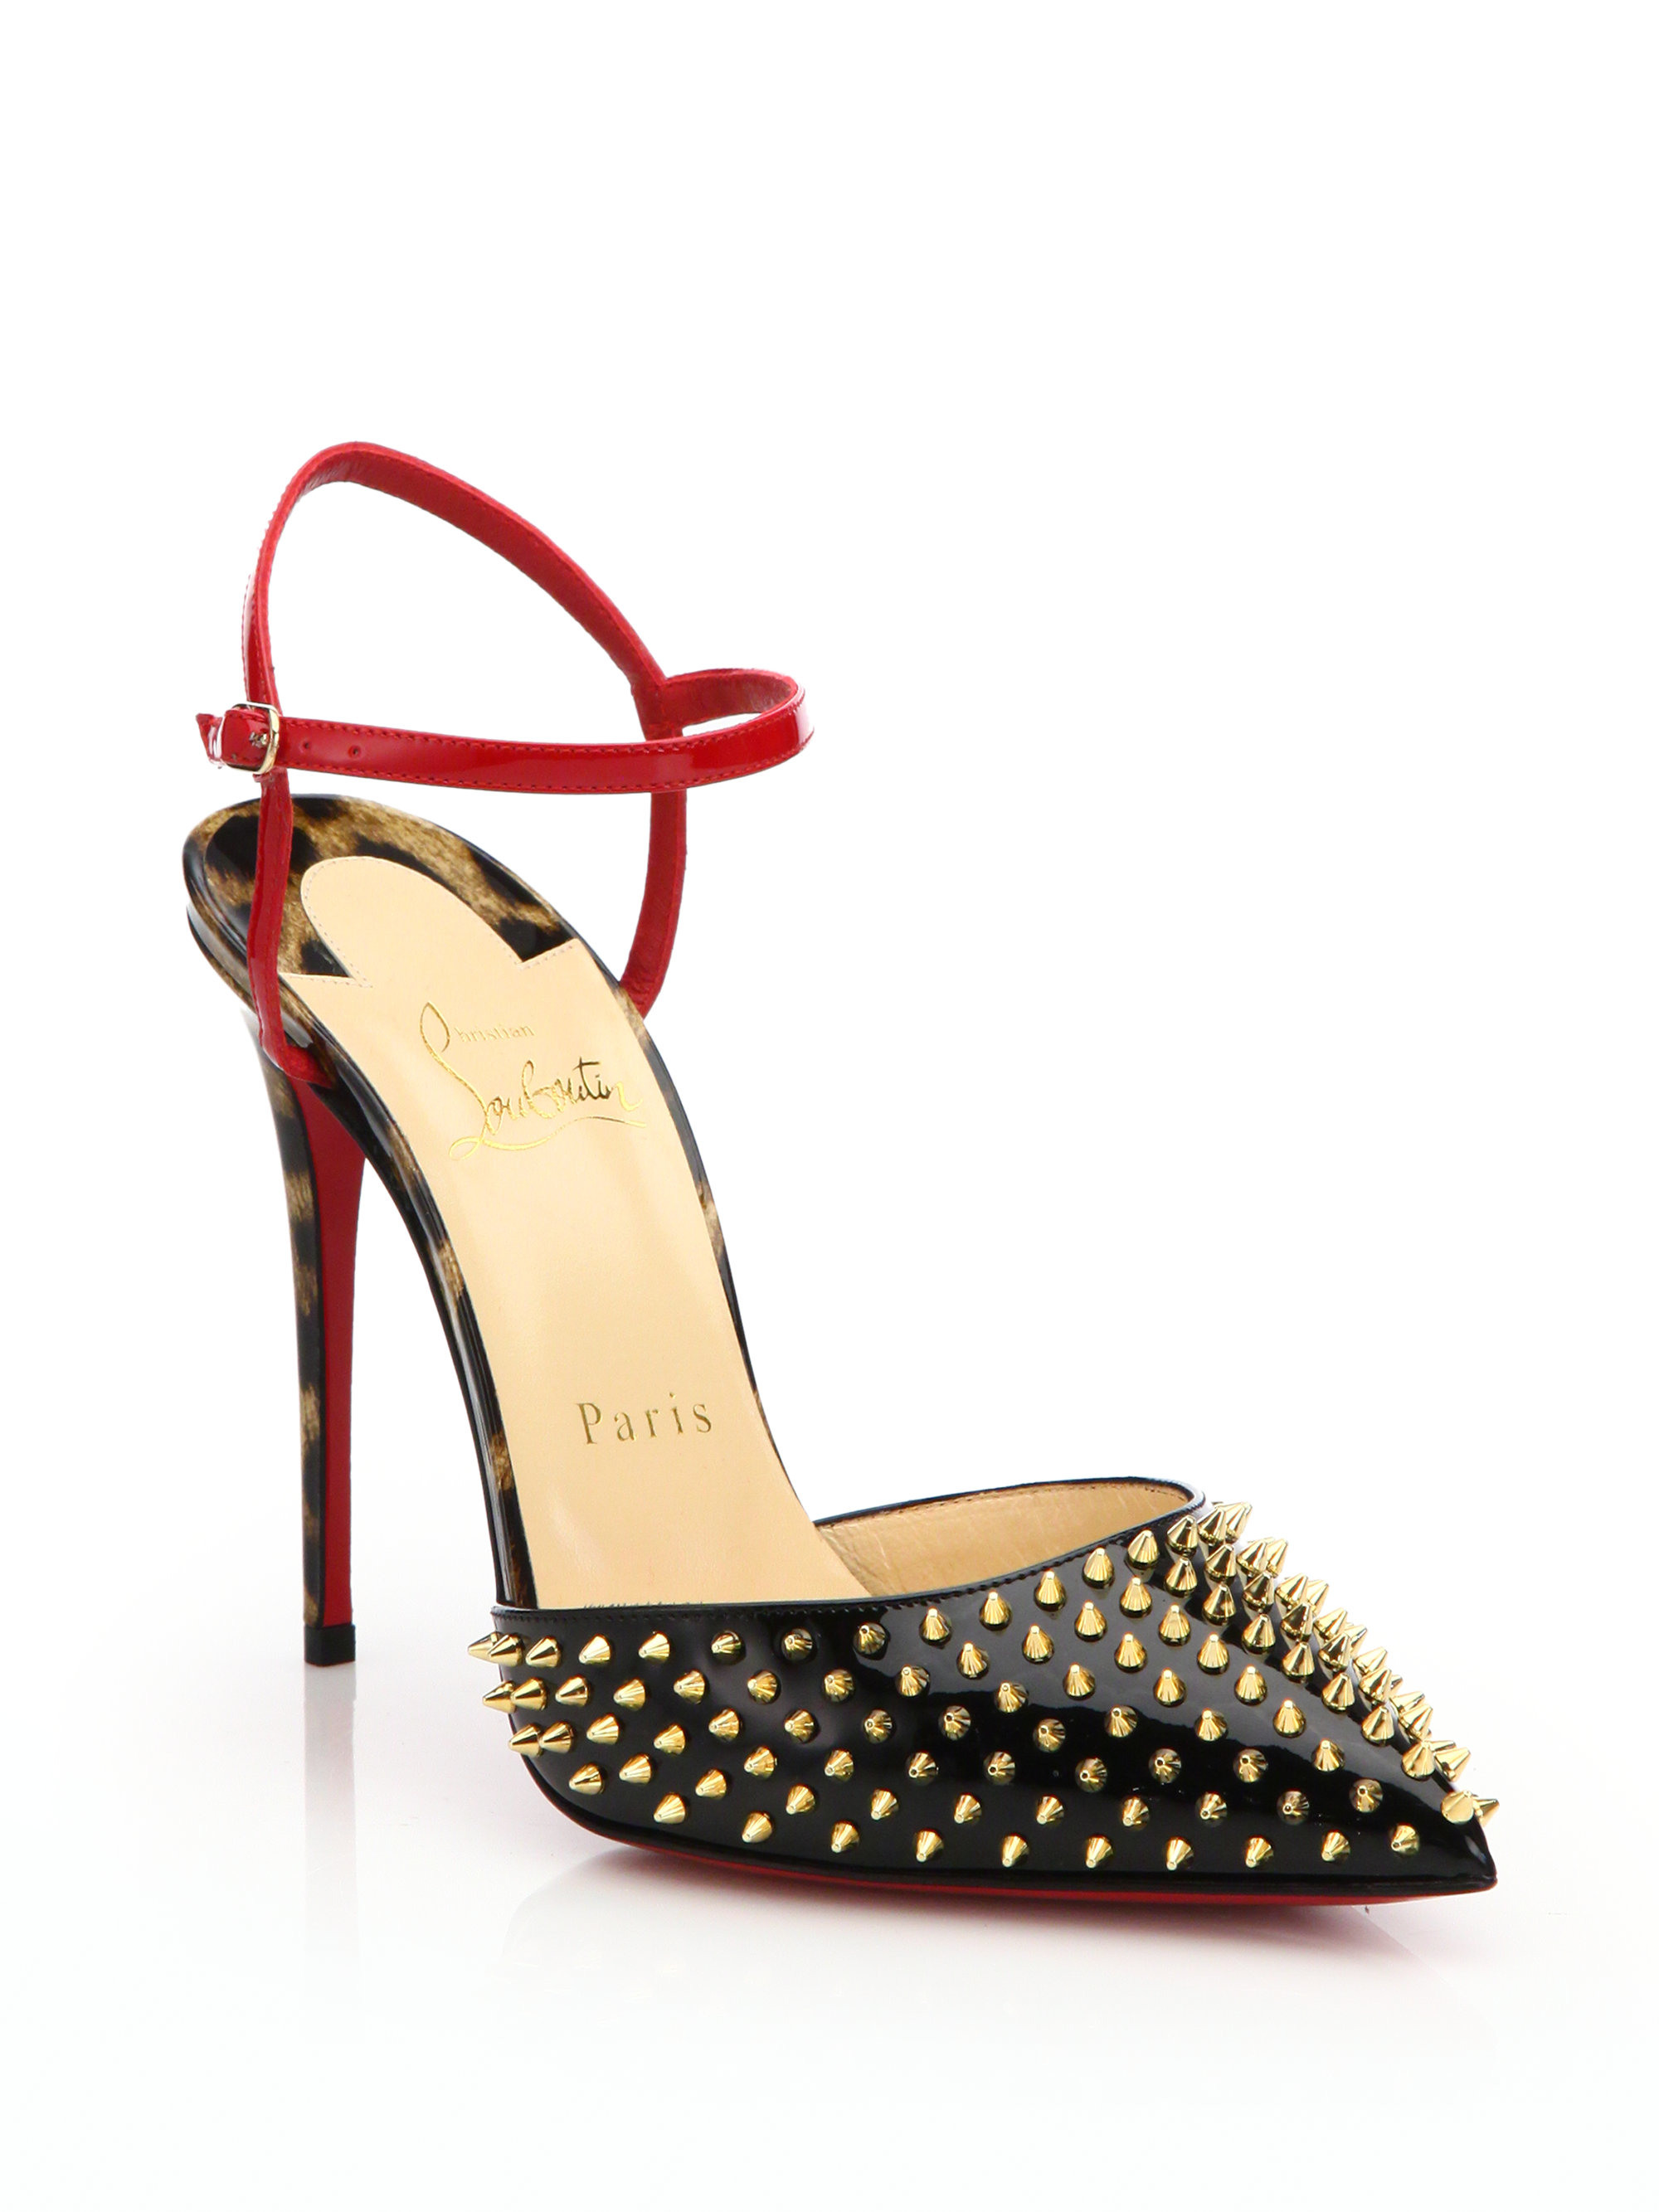 Christian louboutin Baila Spike Studded Leather Pumps in Red | Lyst